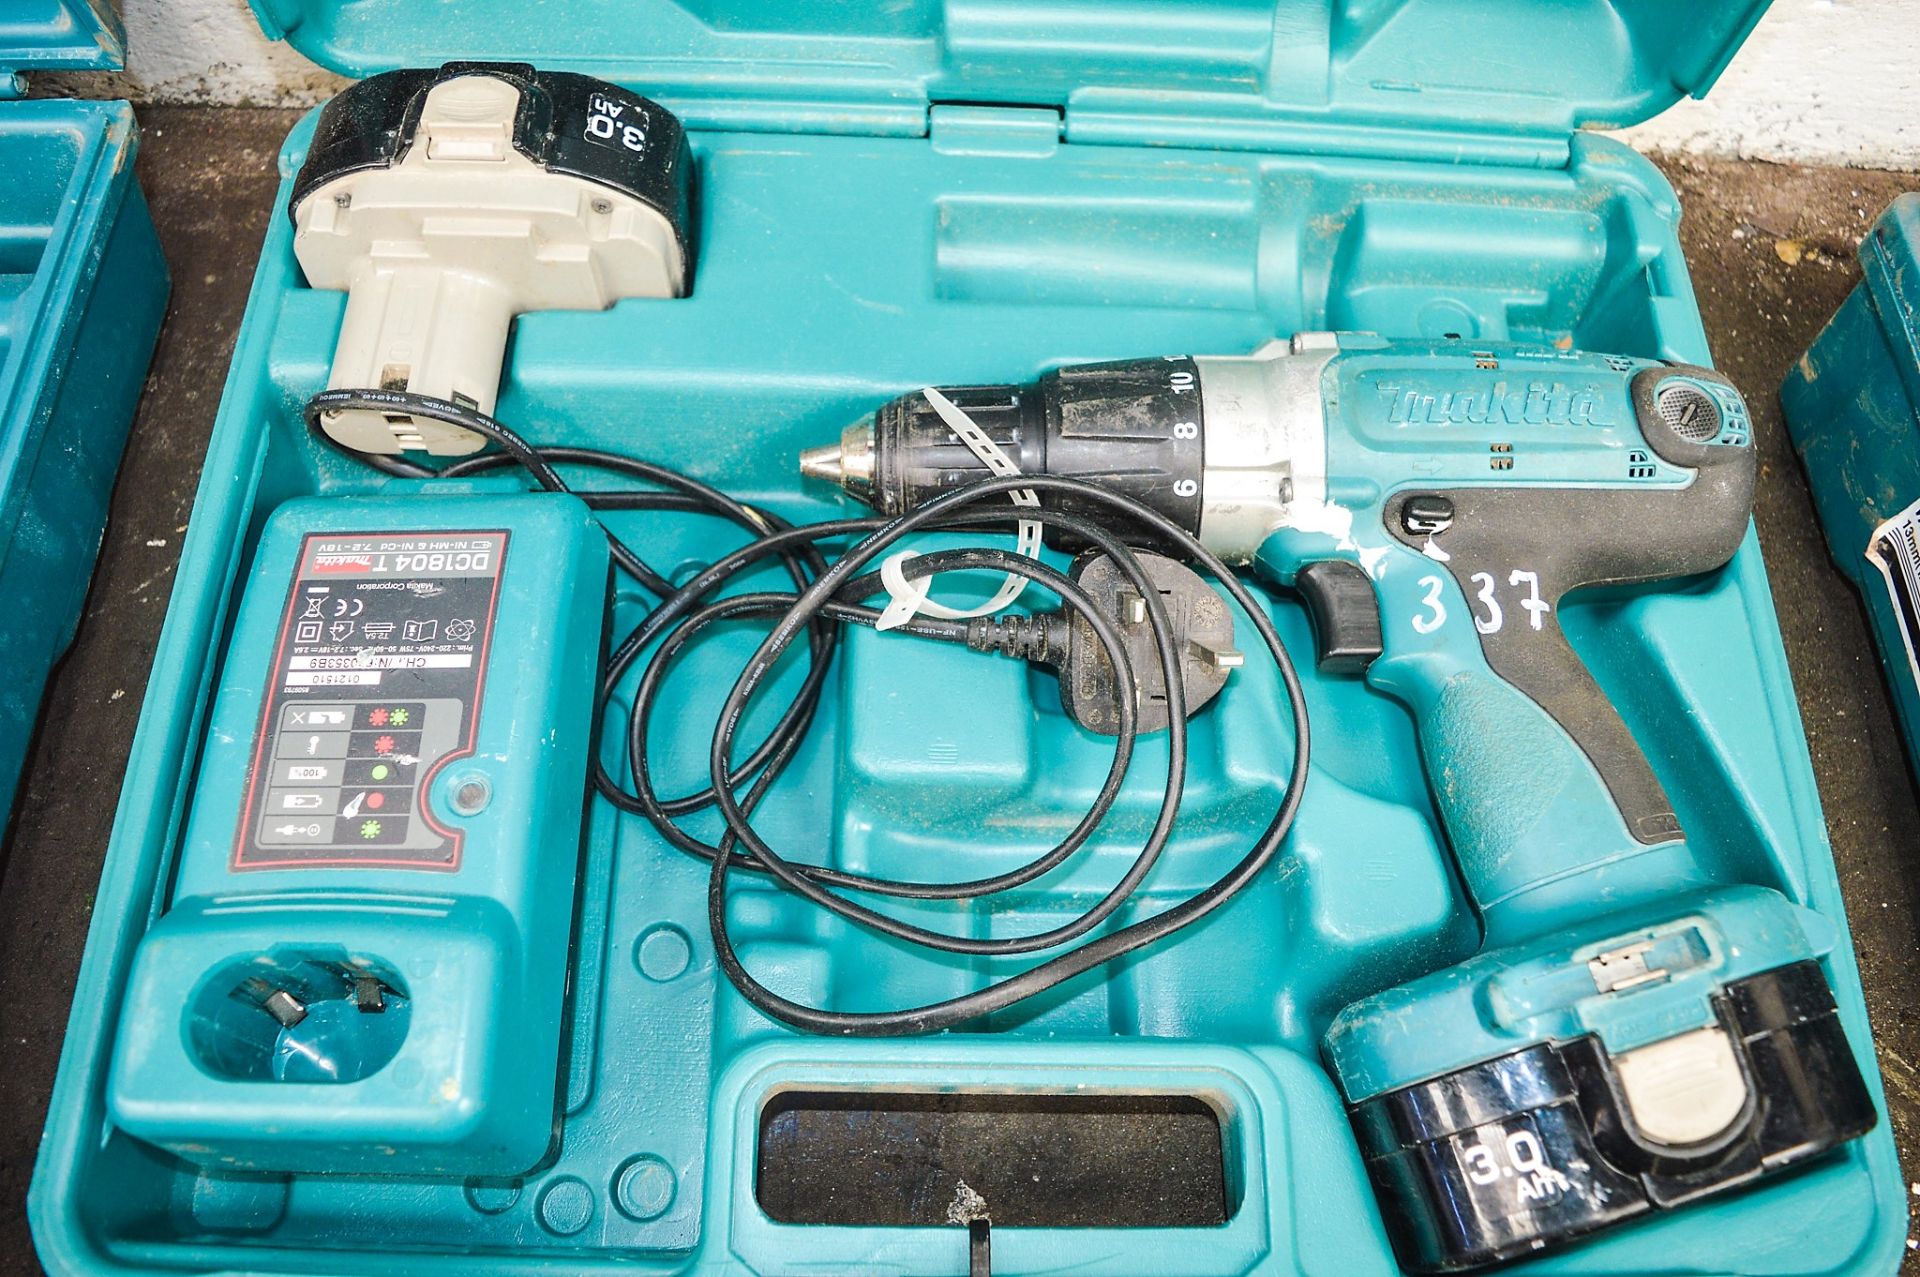 Makita 18v cordless power drill c/w charger, 2 batteries & carry case A541998